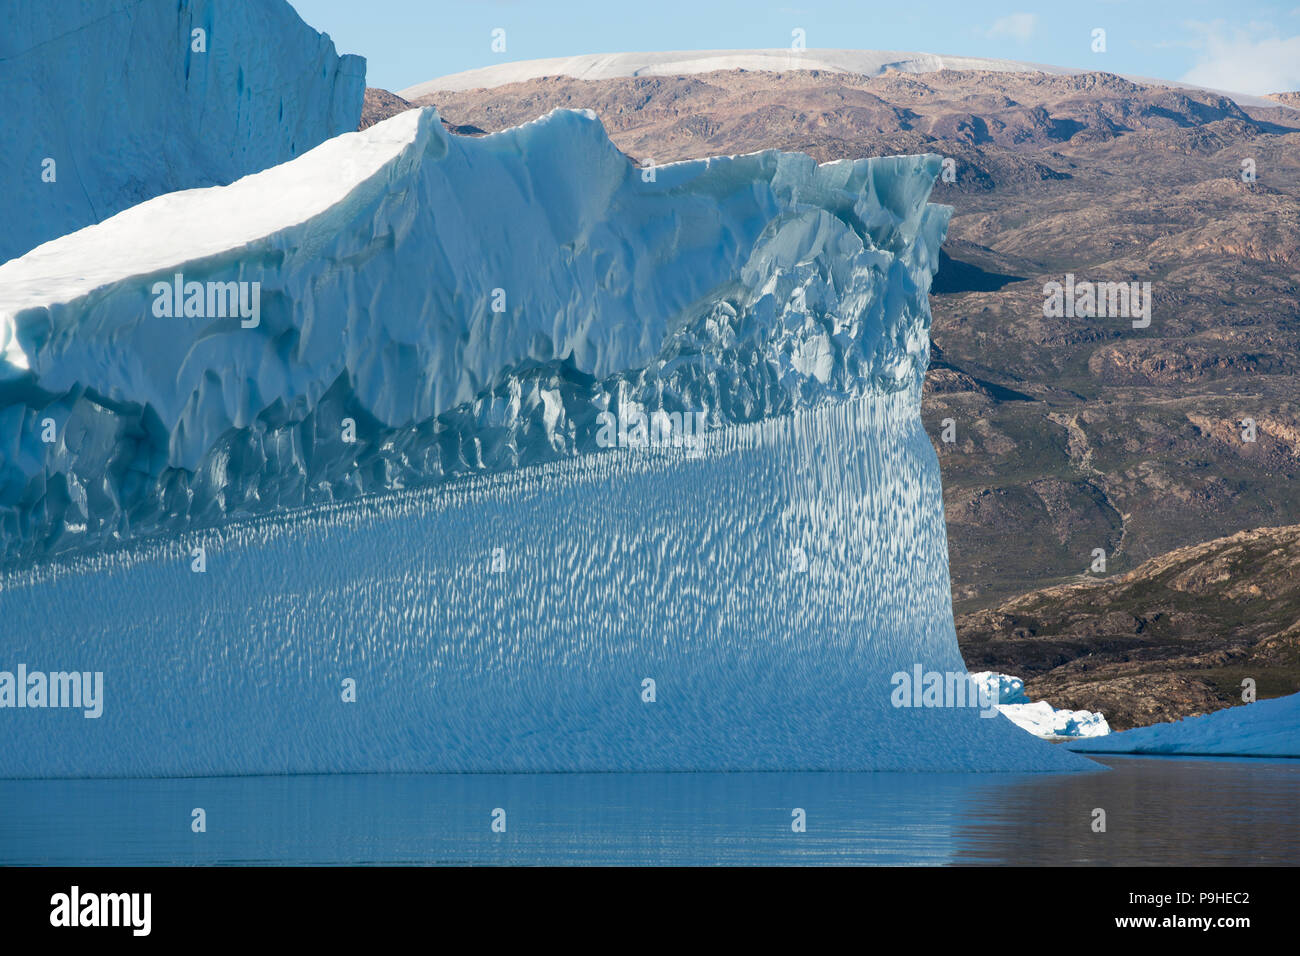 Gros iceberg, Scoresby Sound, Groenland Banque D'Images